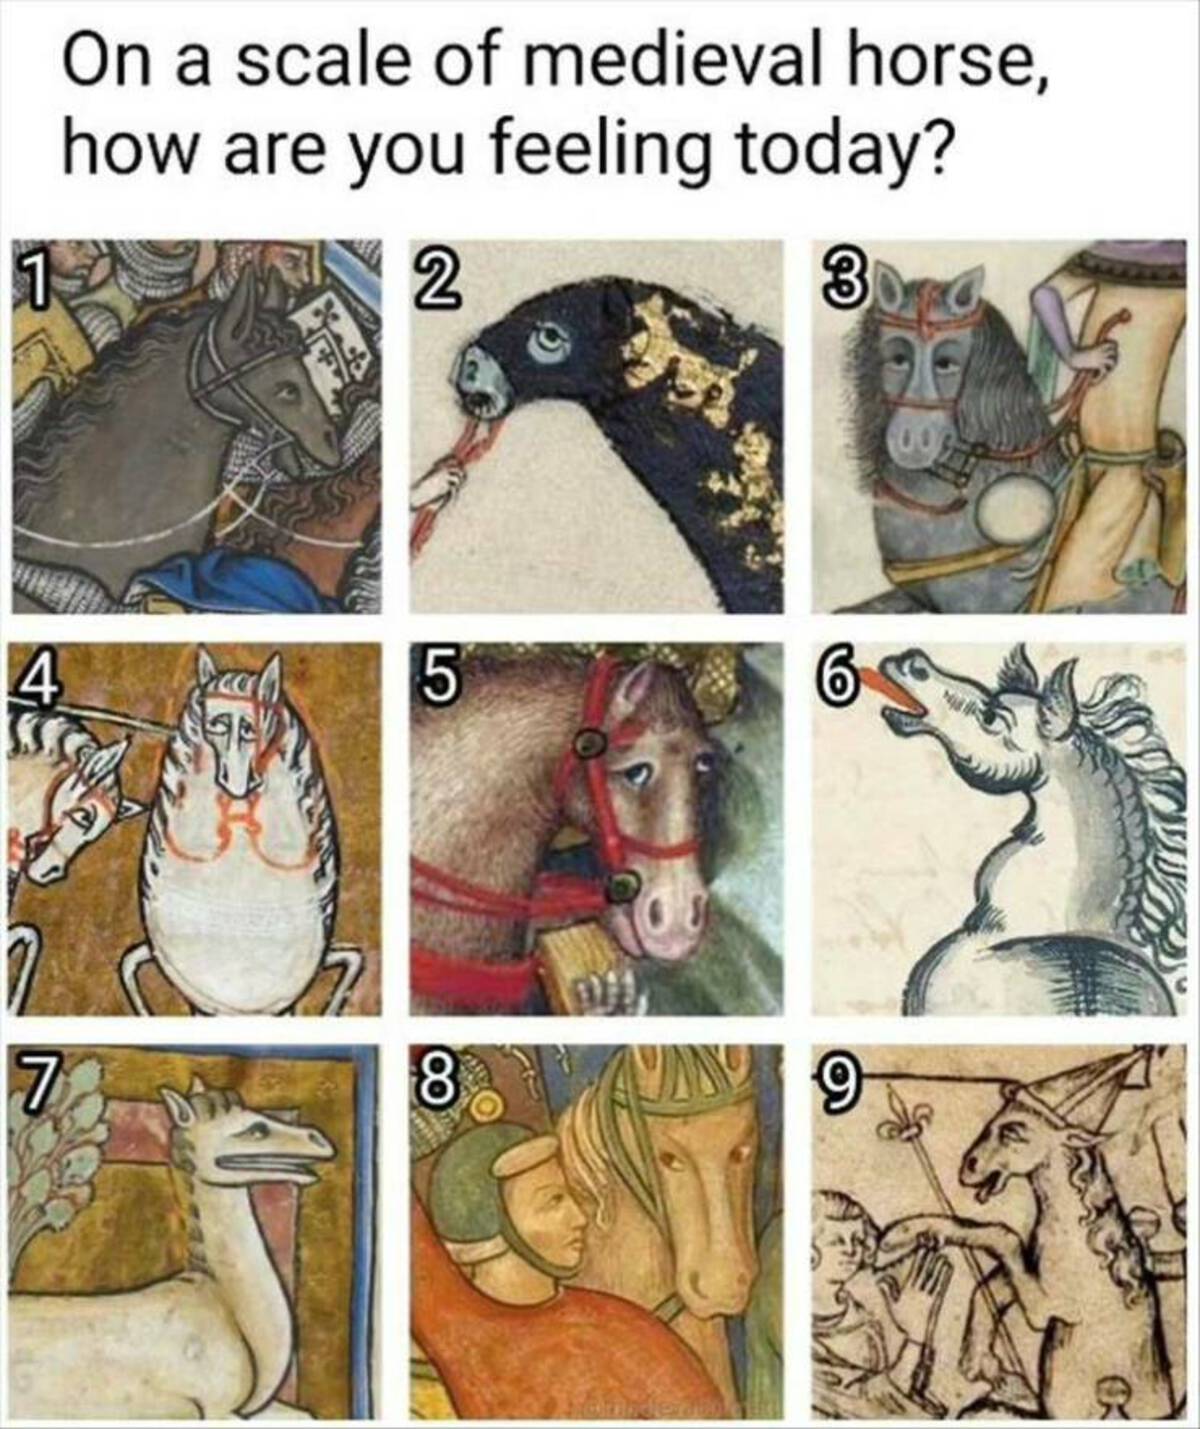 Horse - On a scale of medieval horse, how are you feeling today? 1 2 4 5 3 100 7 8 An 9 B